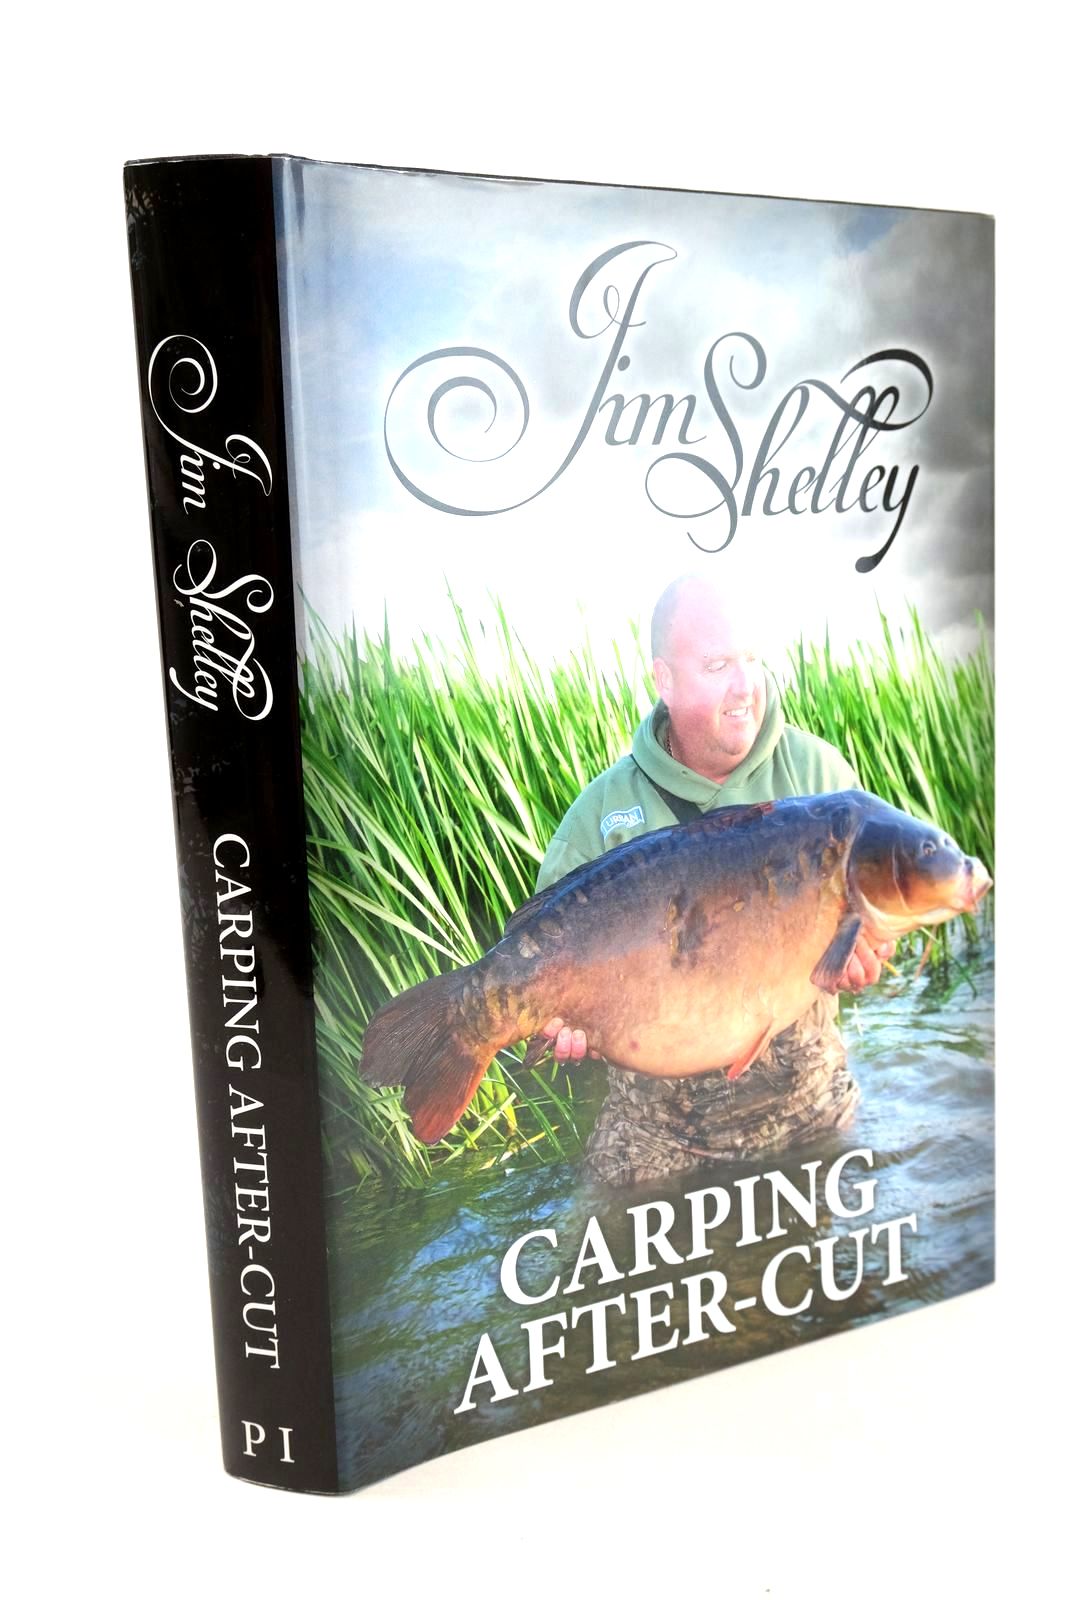 Photo of CARPING AFTER-CUT- Stock Number: 1327633